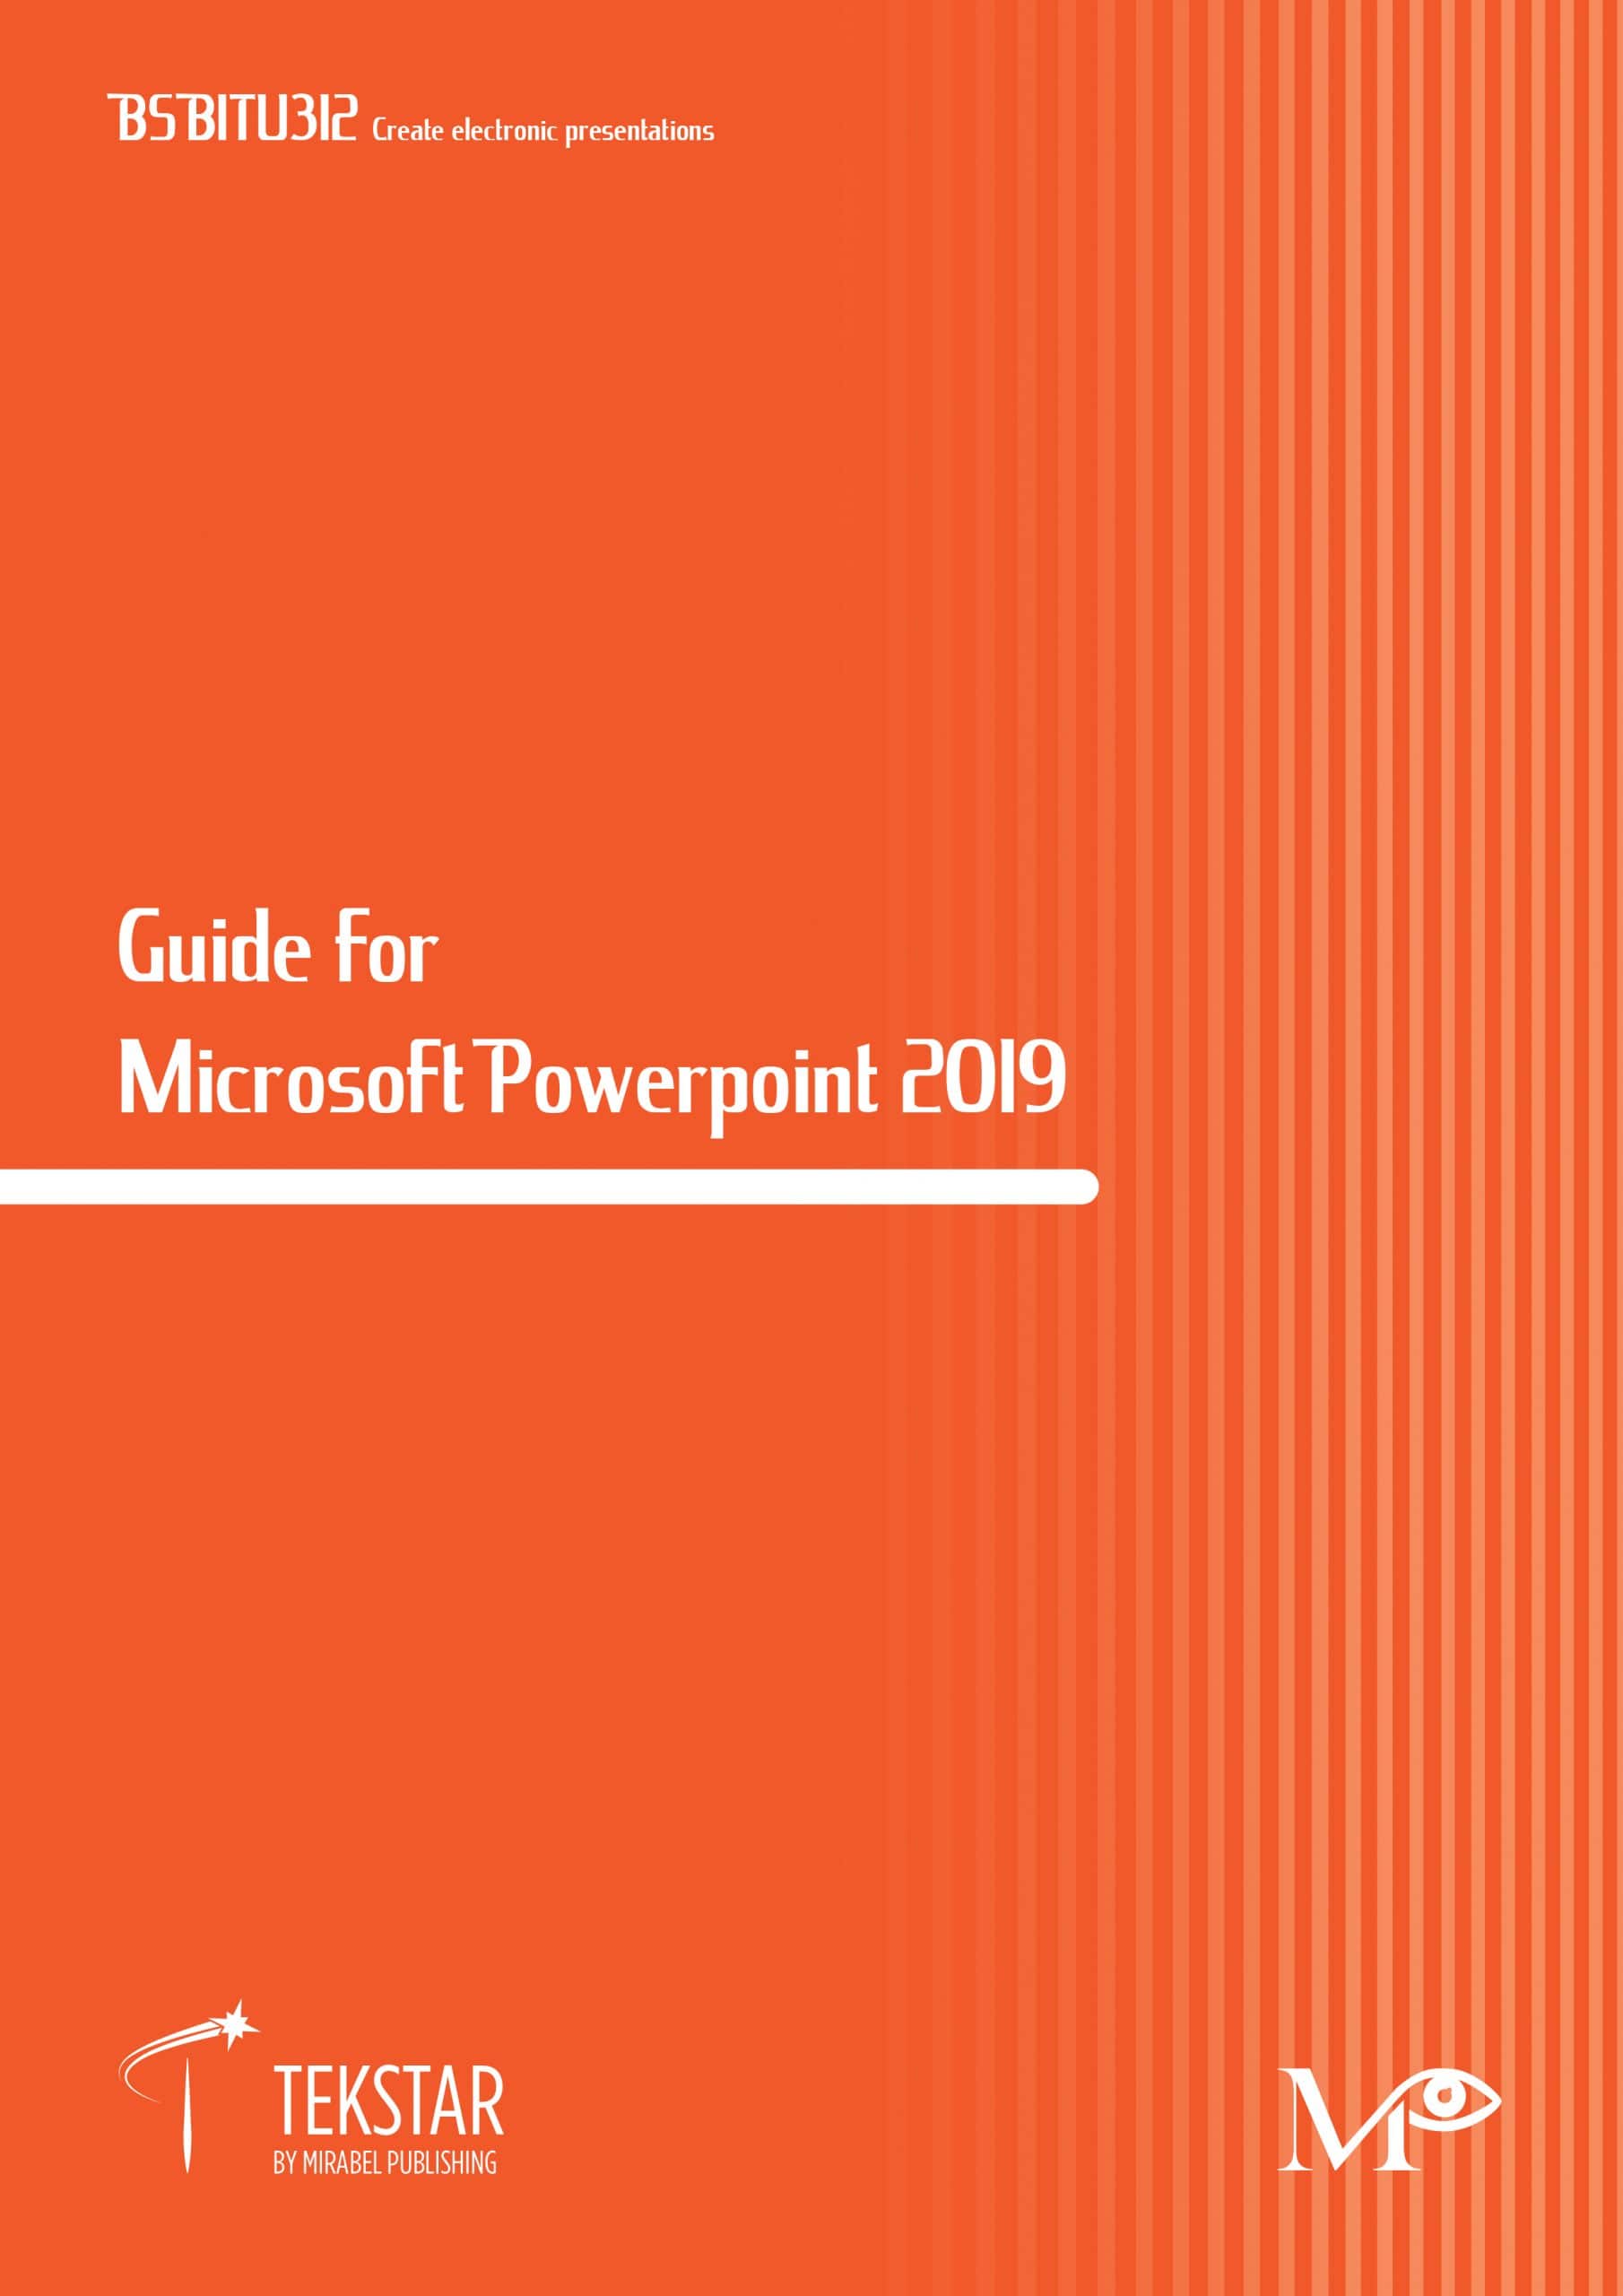 Guide for Microsoft Powerpoint 2019